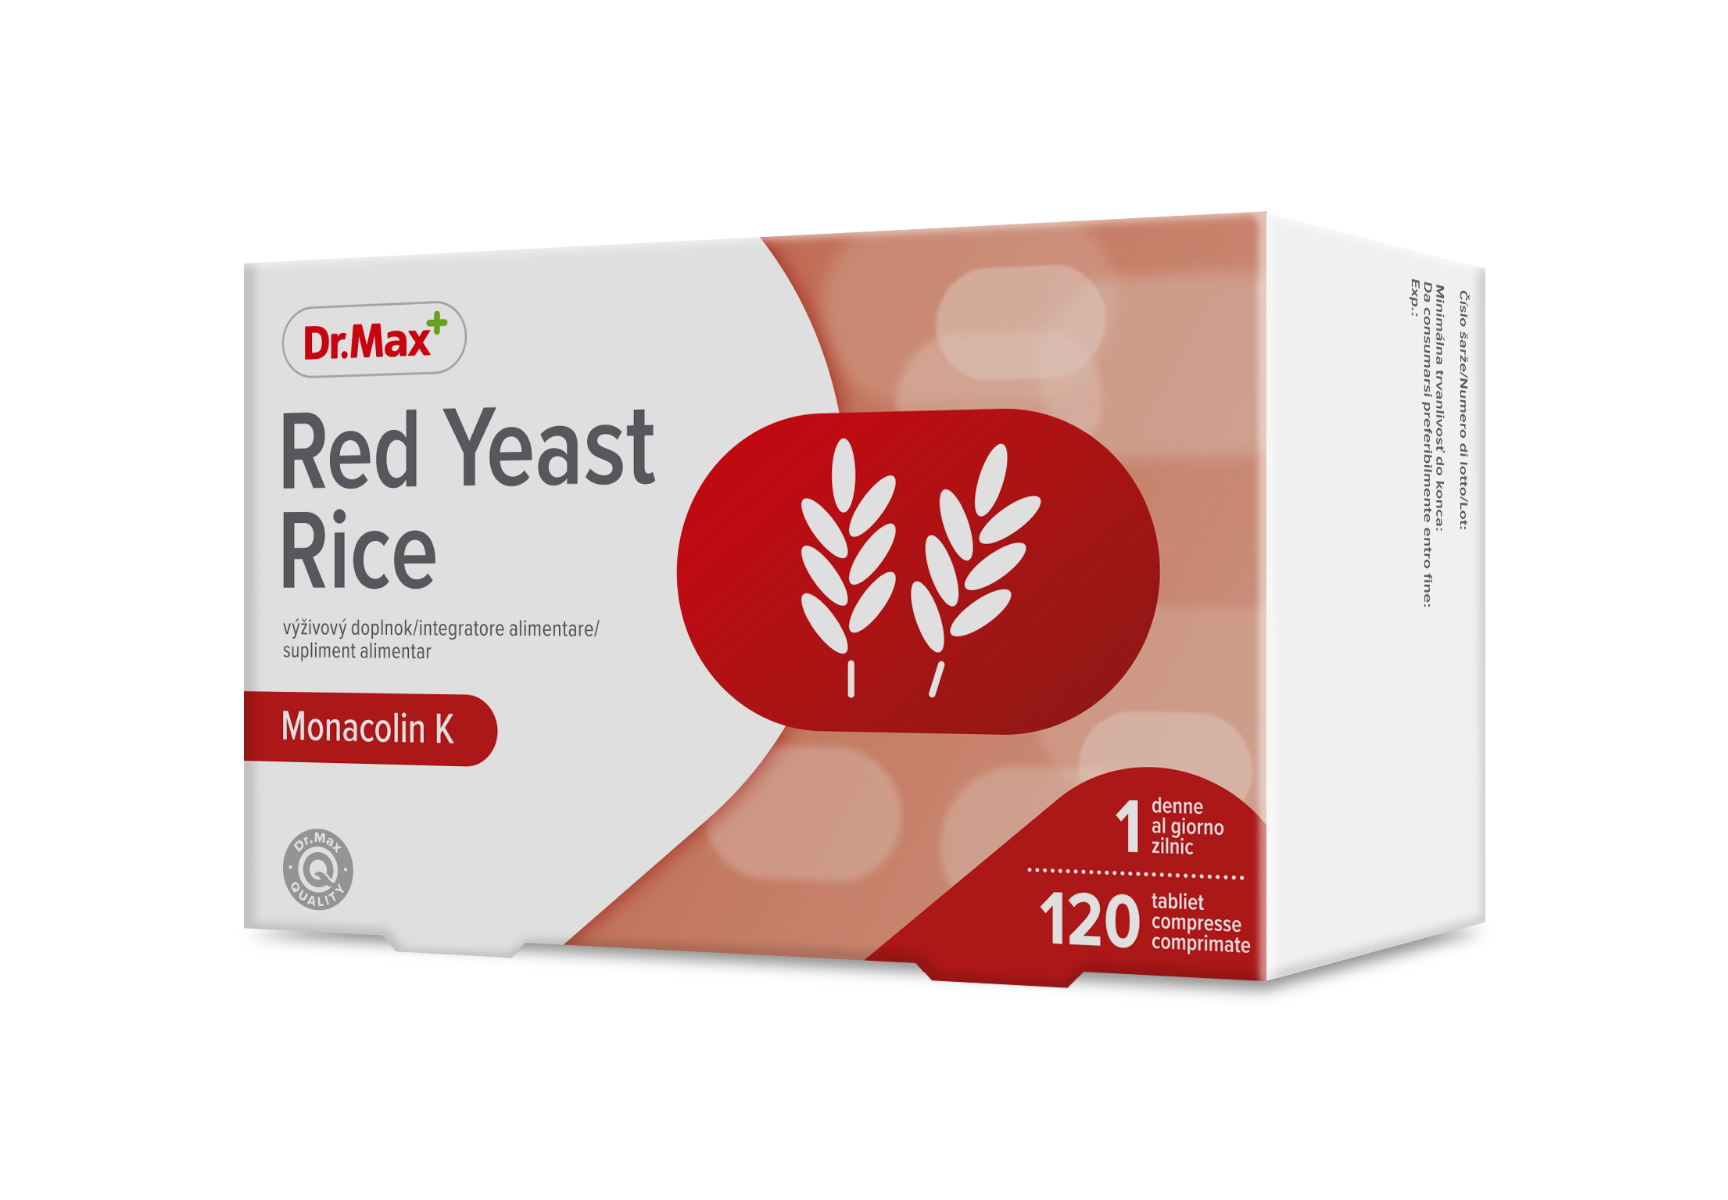 Dr. Max Red Yeast Rice, 120 comprimate filmate